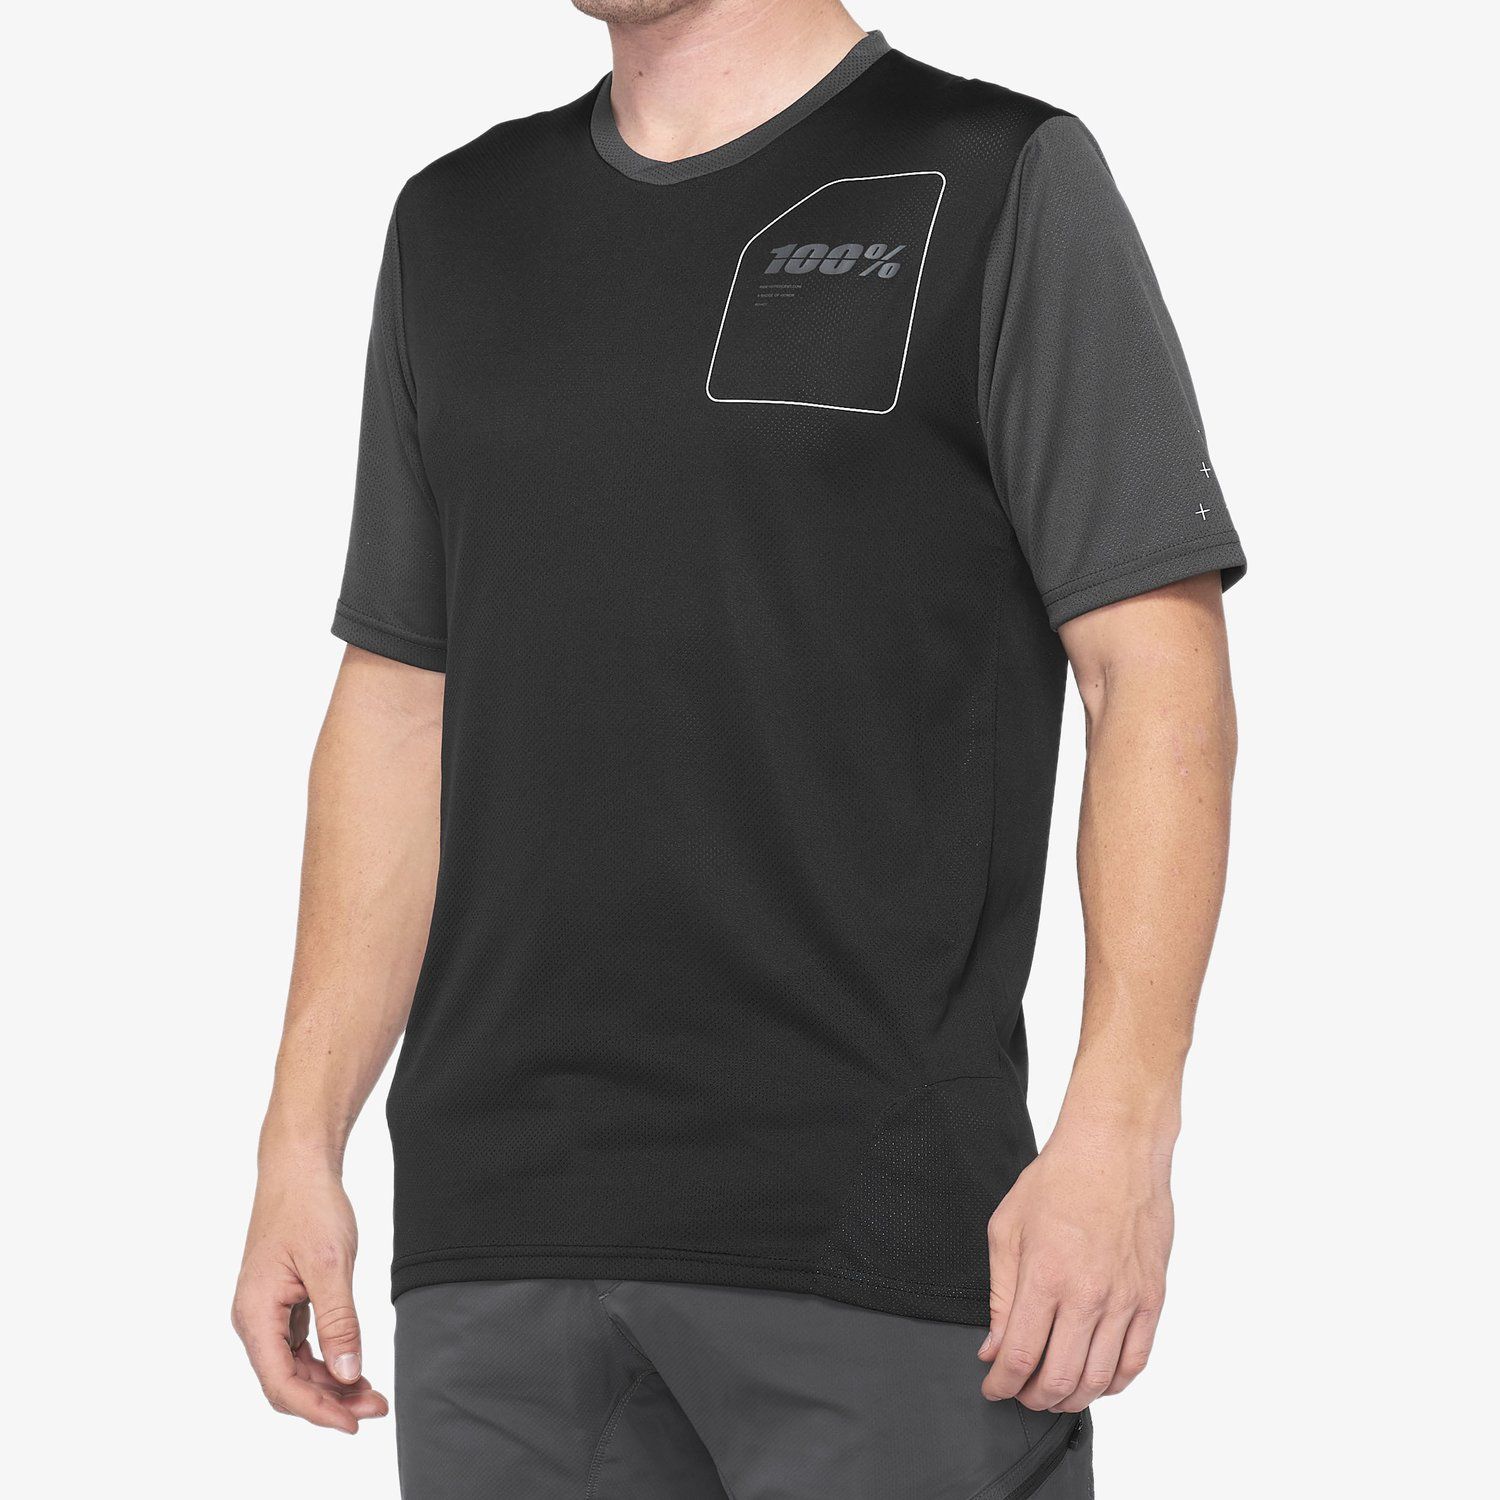 RIDECAMP Jersey Charcoal/Black D